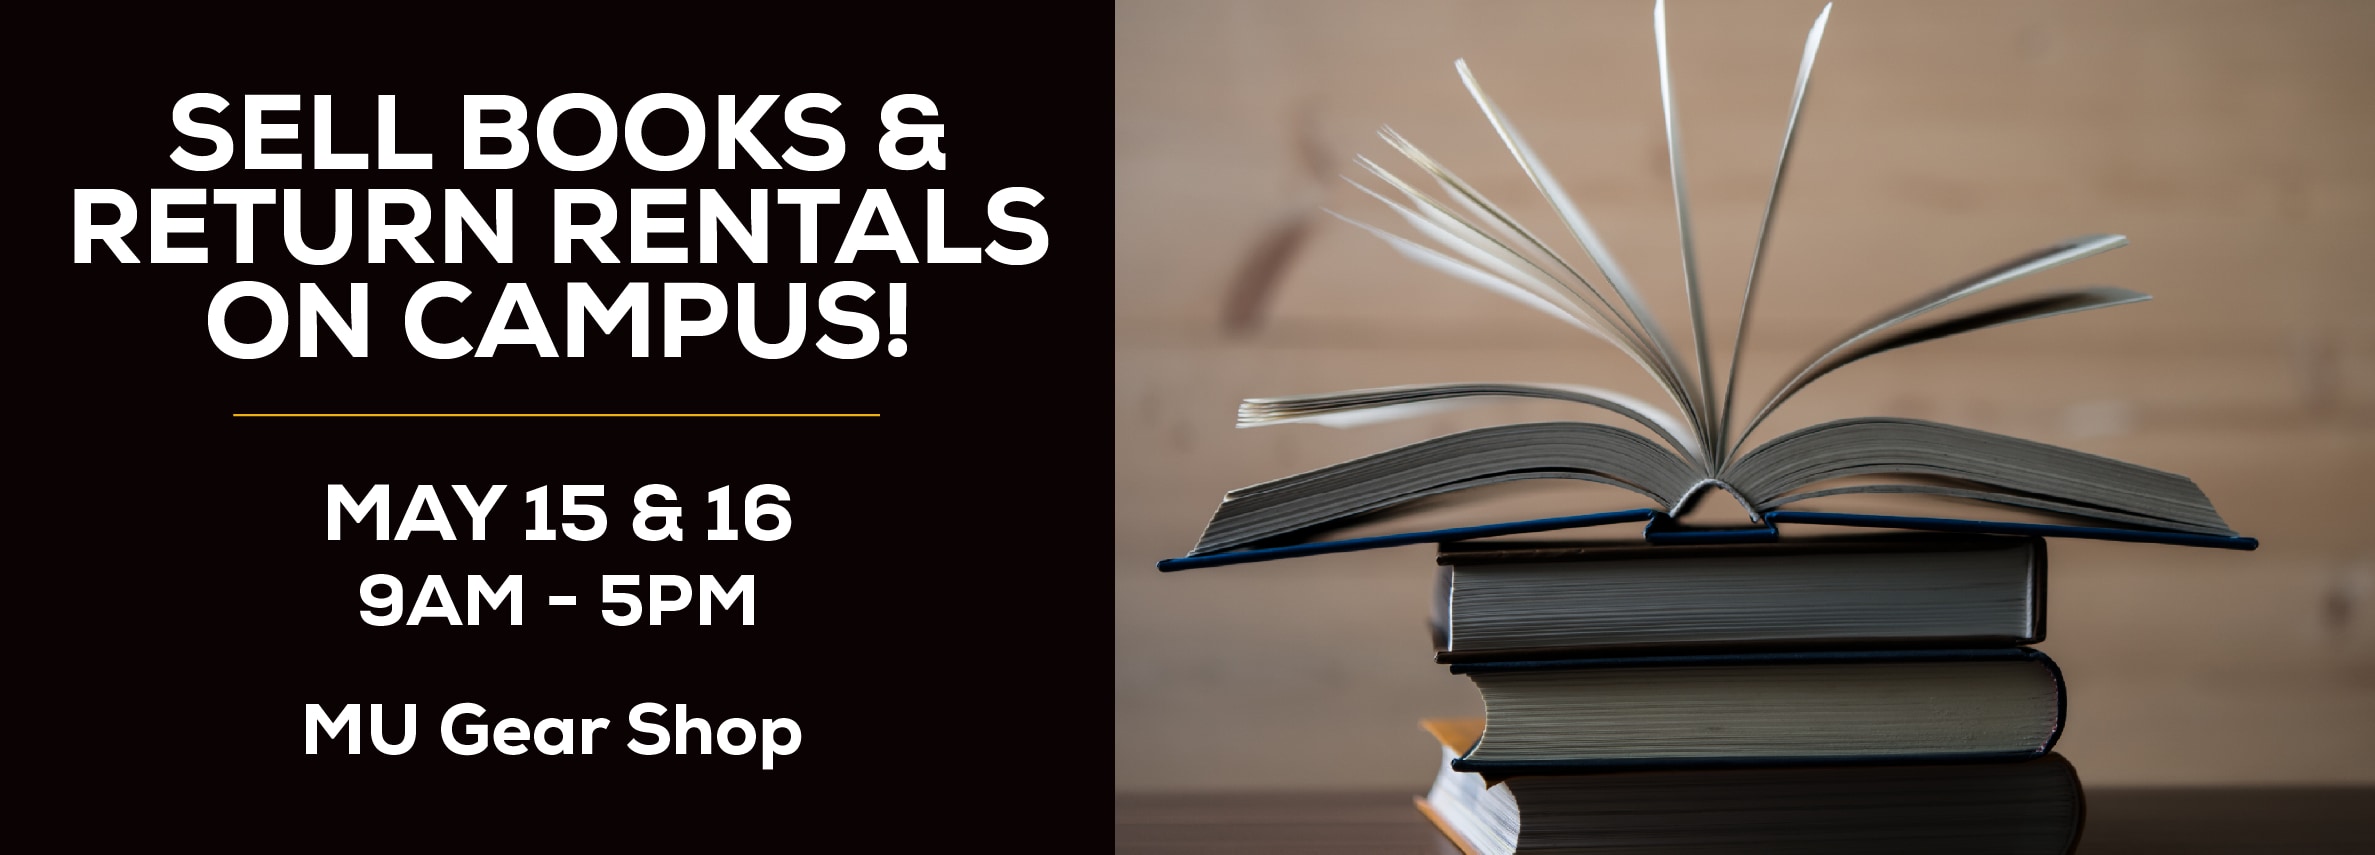 Sell books and return rentals on campus! May 15 & 16, 9am to 5pm at the MU Gear Shop.